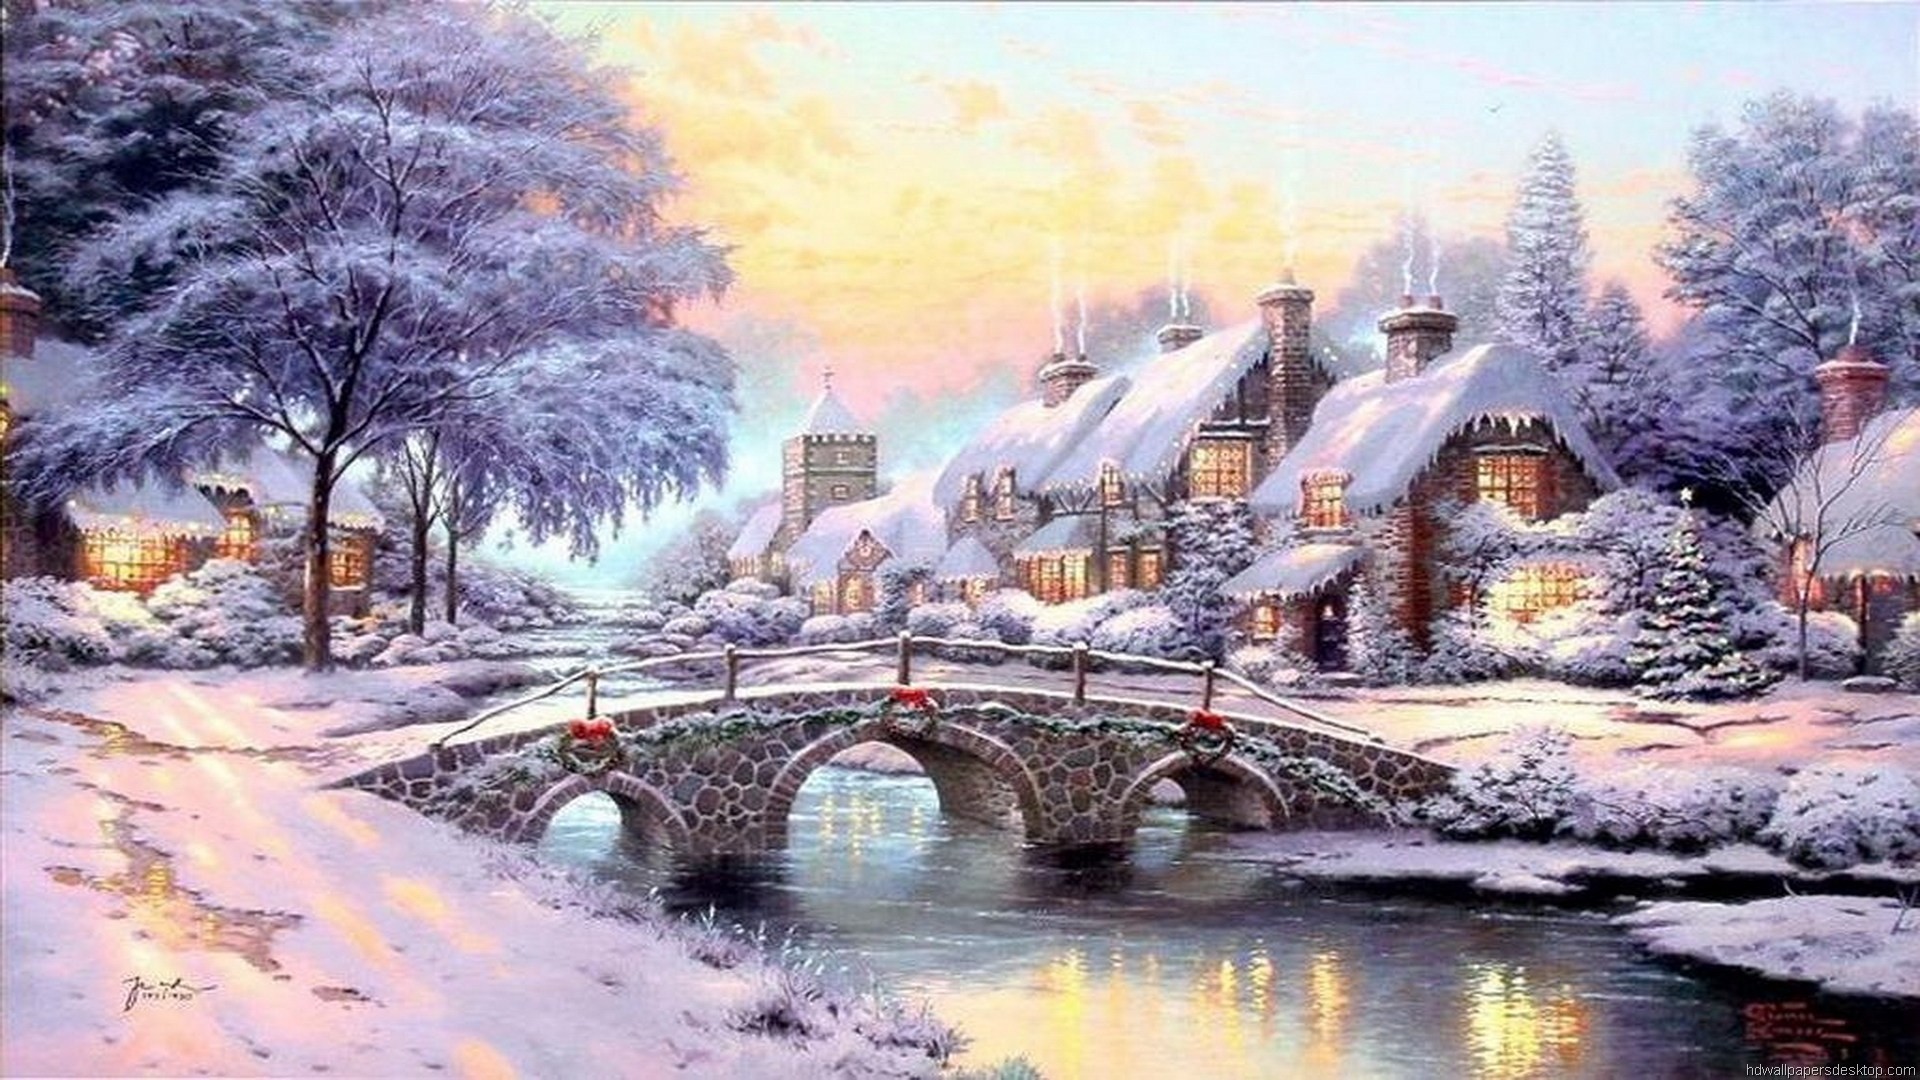 1920x1080 Awesome Thomas Kinkade Christmas Village Wallpaper Free download best  Latest 3D HD desktop wallpapers background Wide